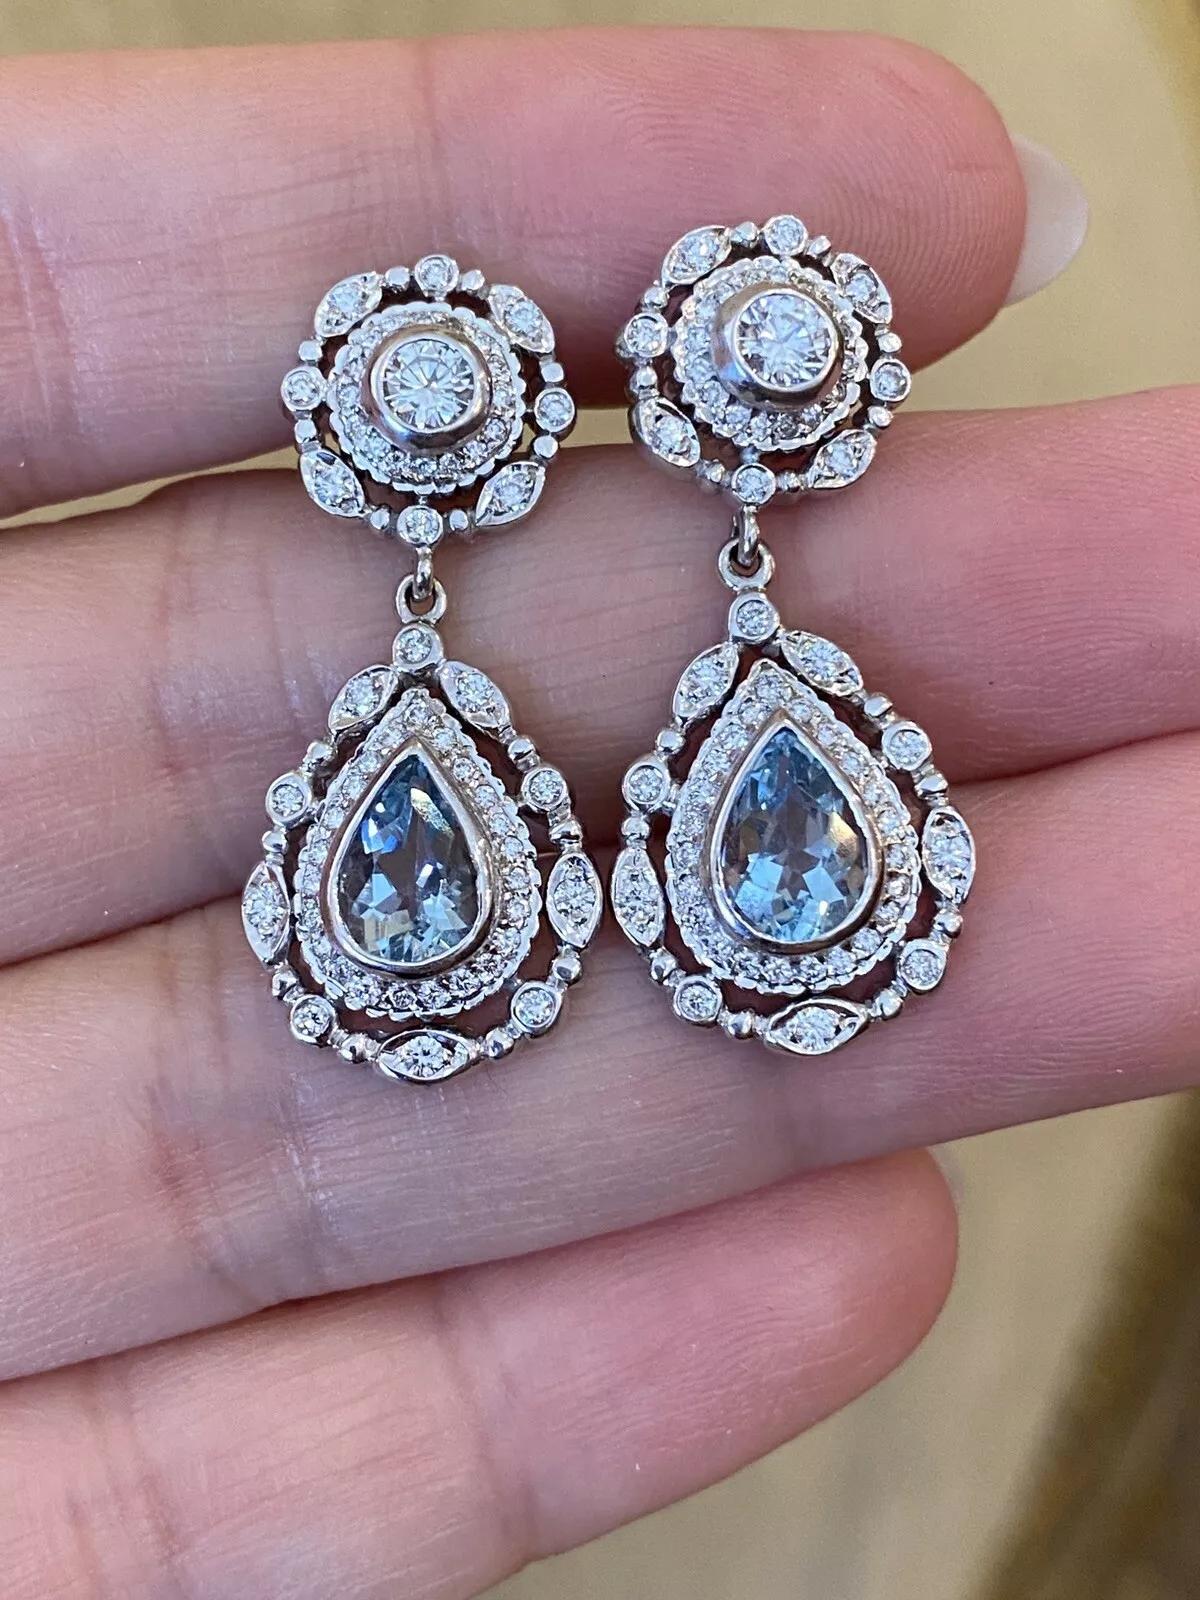 Doris Panos Aquamarine and Diamond Drop Earrings in 18k White Gold For Sale 3